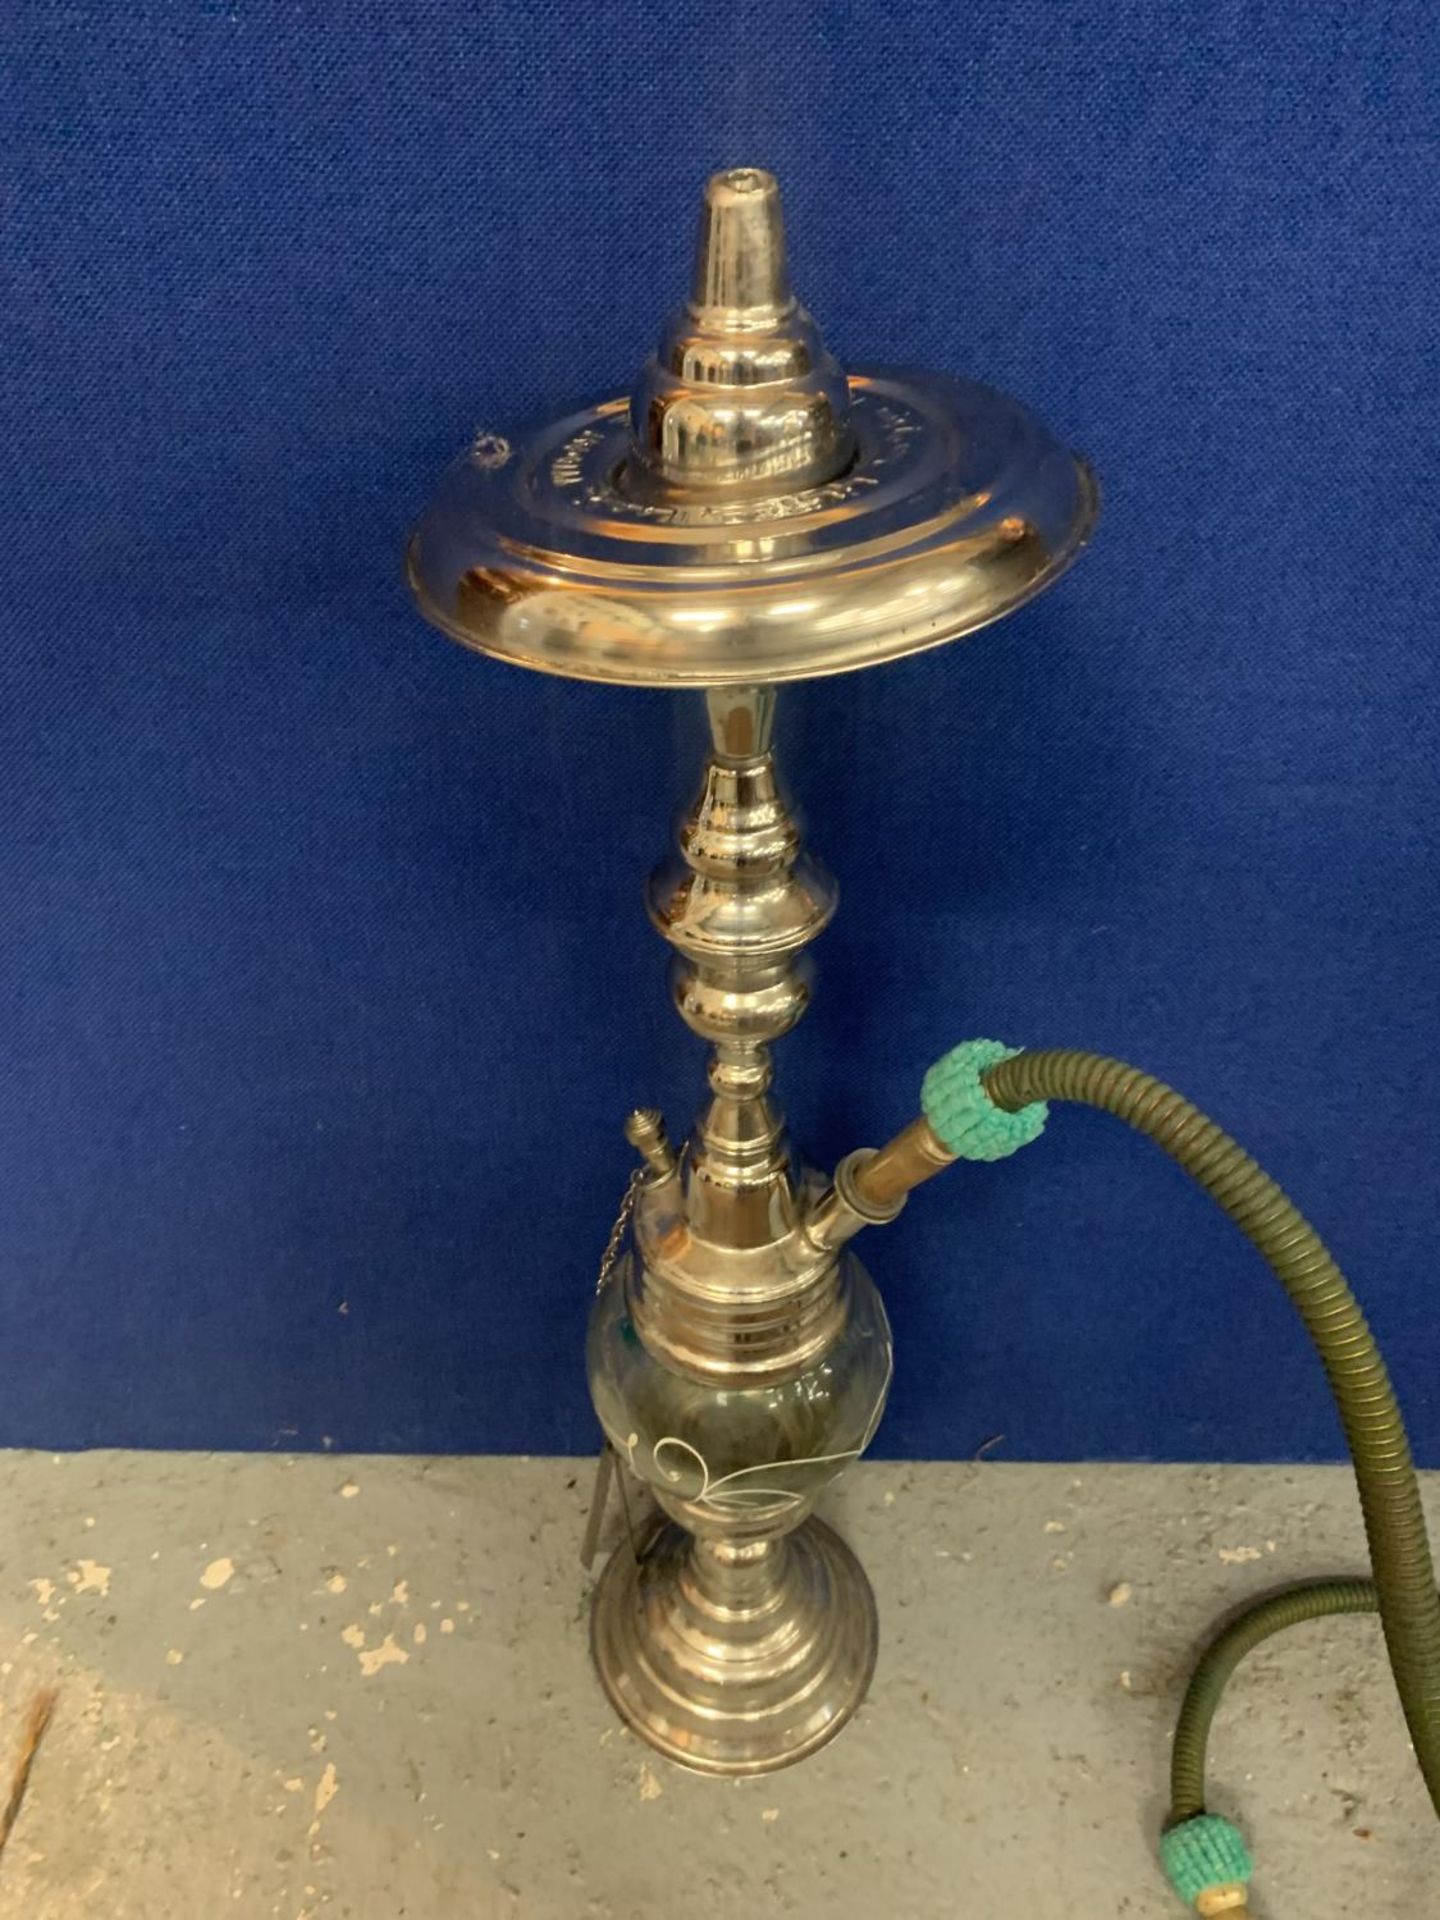 A CHROME AND GLASS SHISHA HOOKAH PIPE, HEIGHT APPROX 70CM - Image 2 of 5